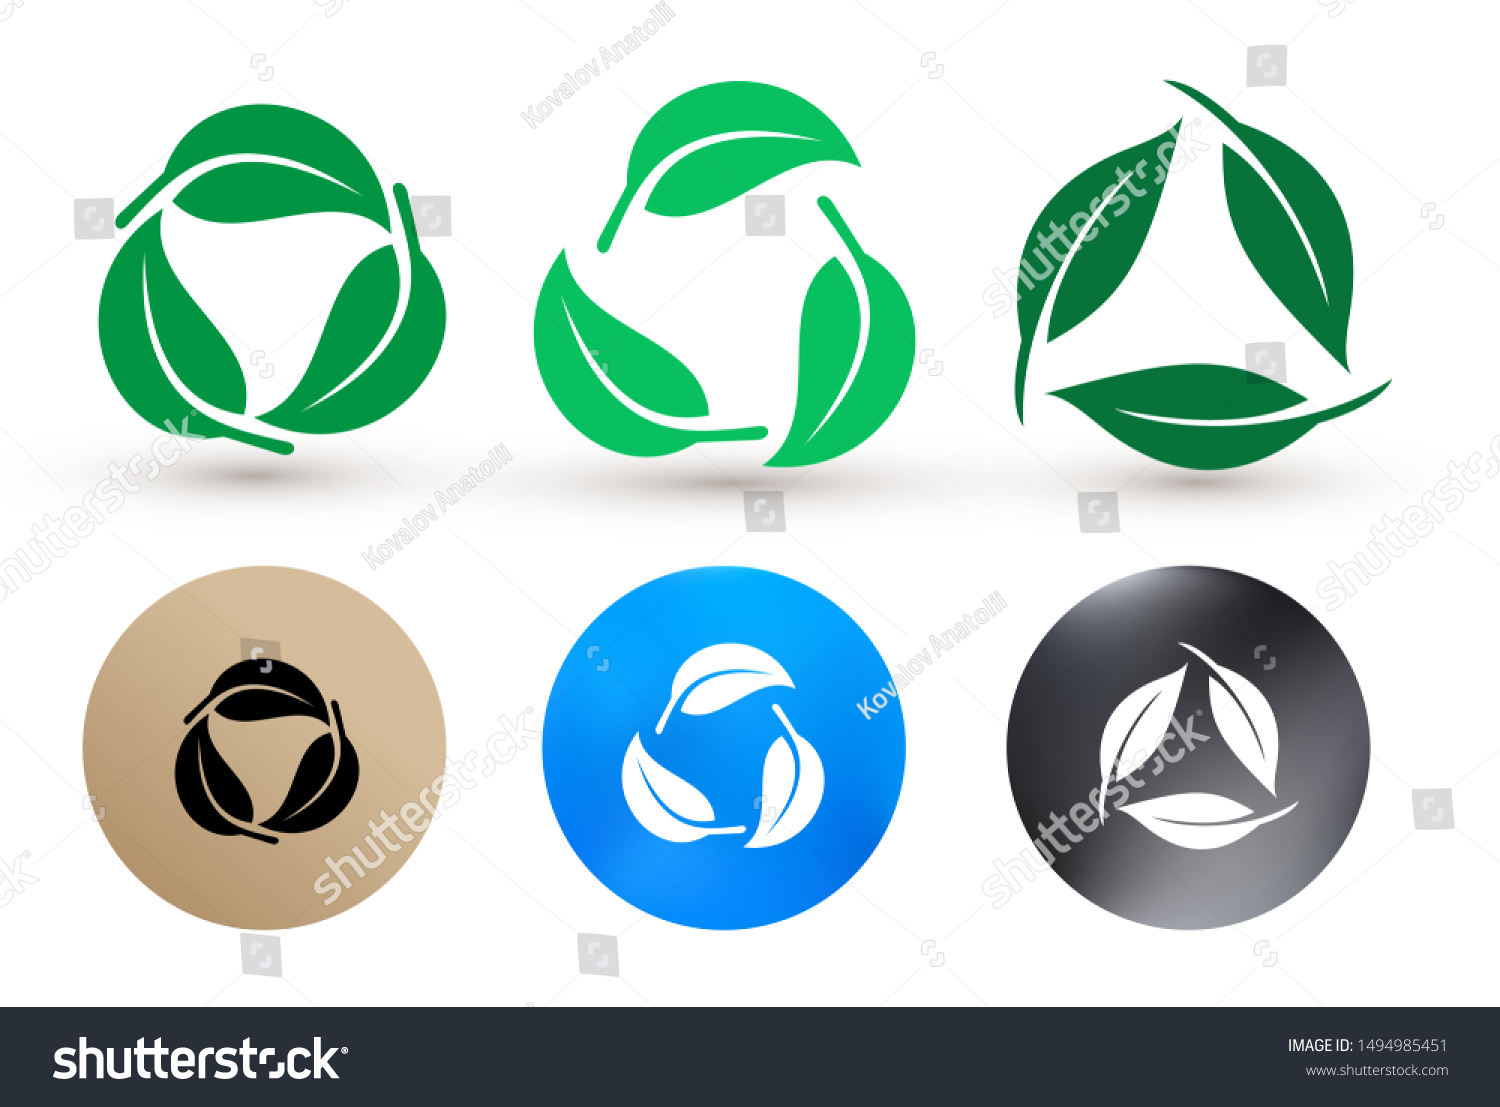 SVG of Set of biodegradable recyclable plastic free package icon. Bio recyclable degradable and recycle leaves label logo template. Vector illustration. Isolated on white background. svg